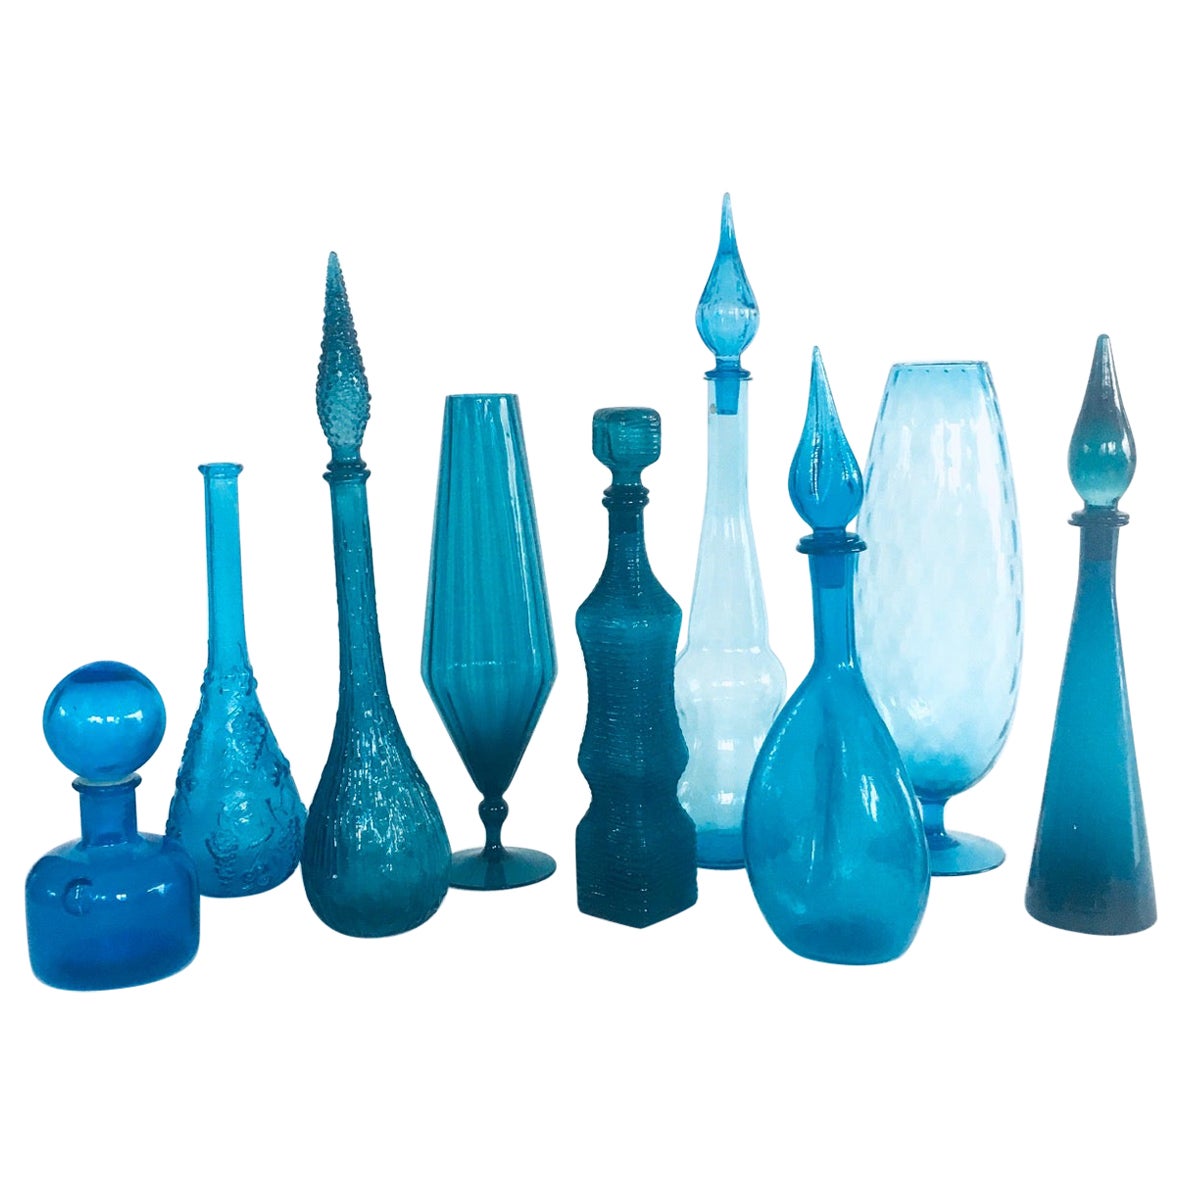 1960's Collection of Vintage Blue Glass Vases and Decanters, Set of 9 For Sale